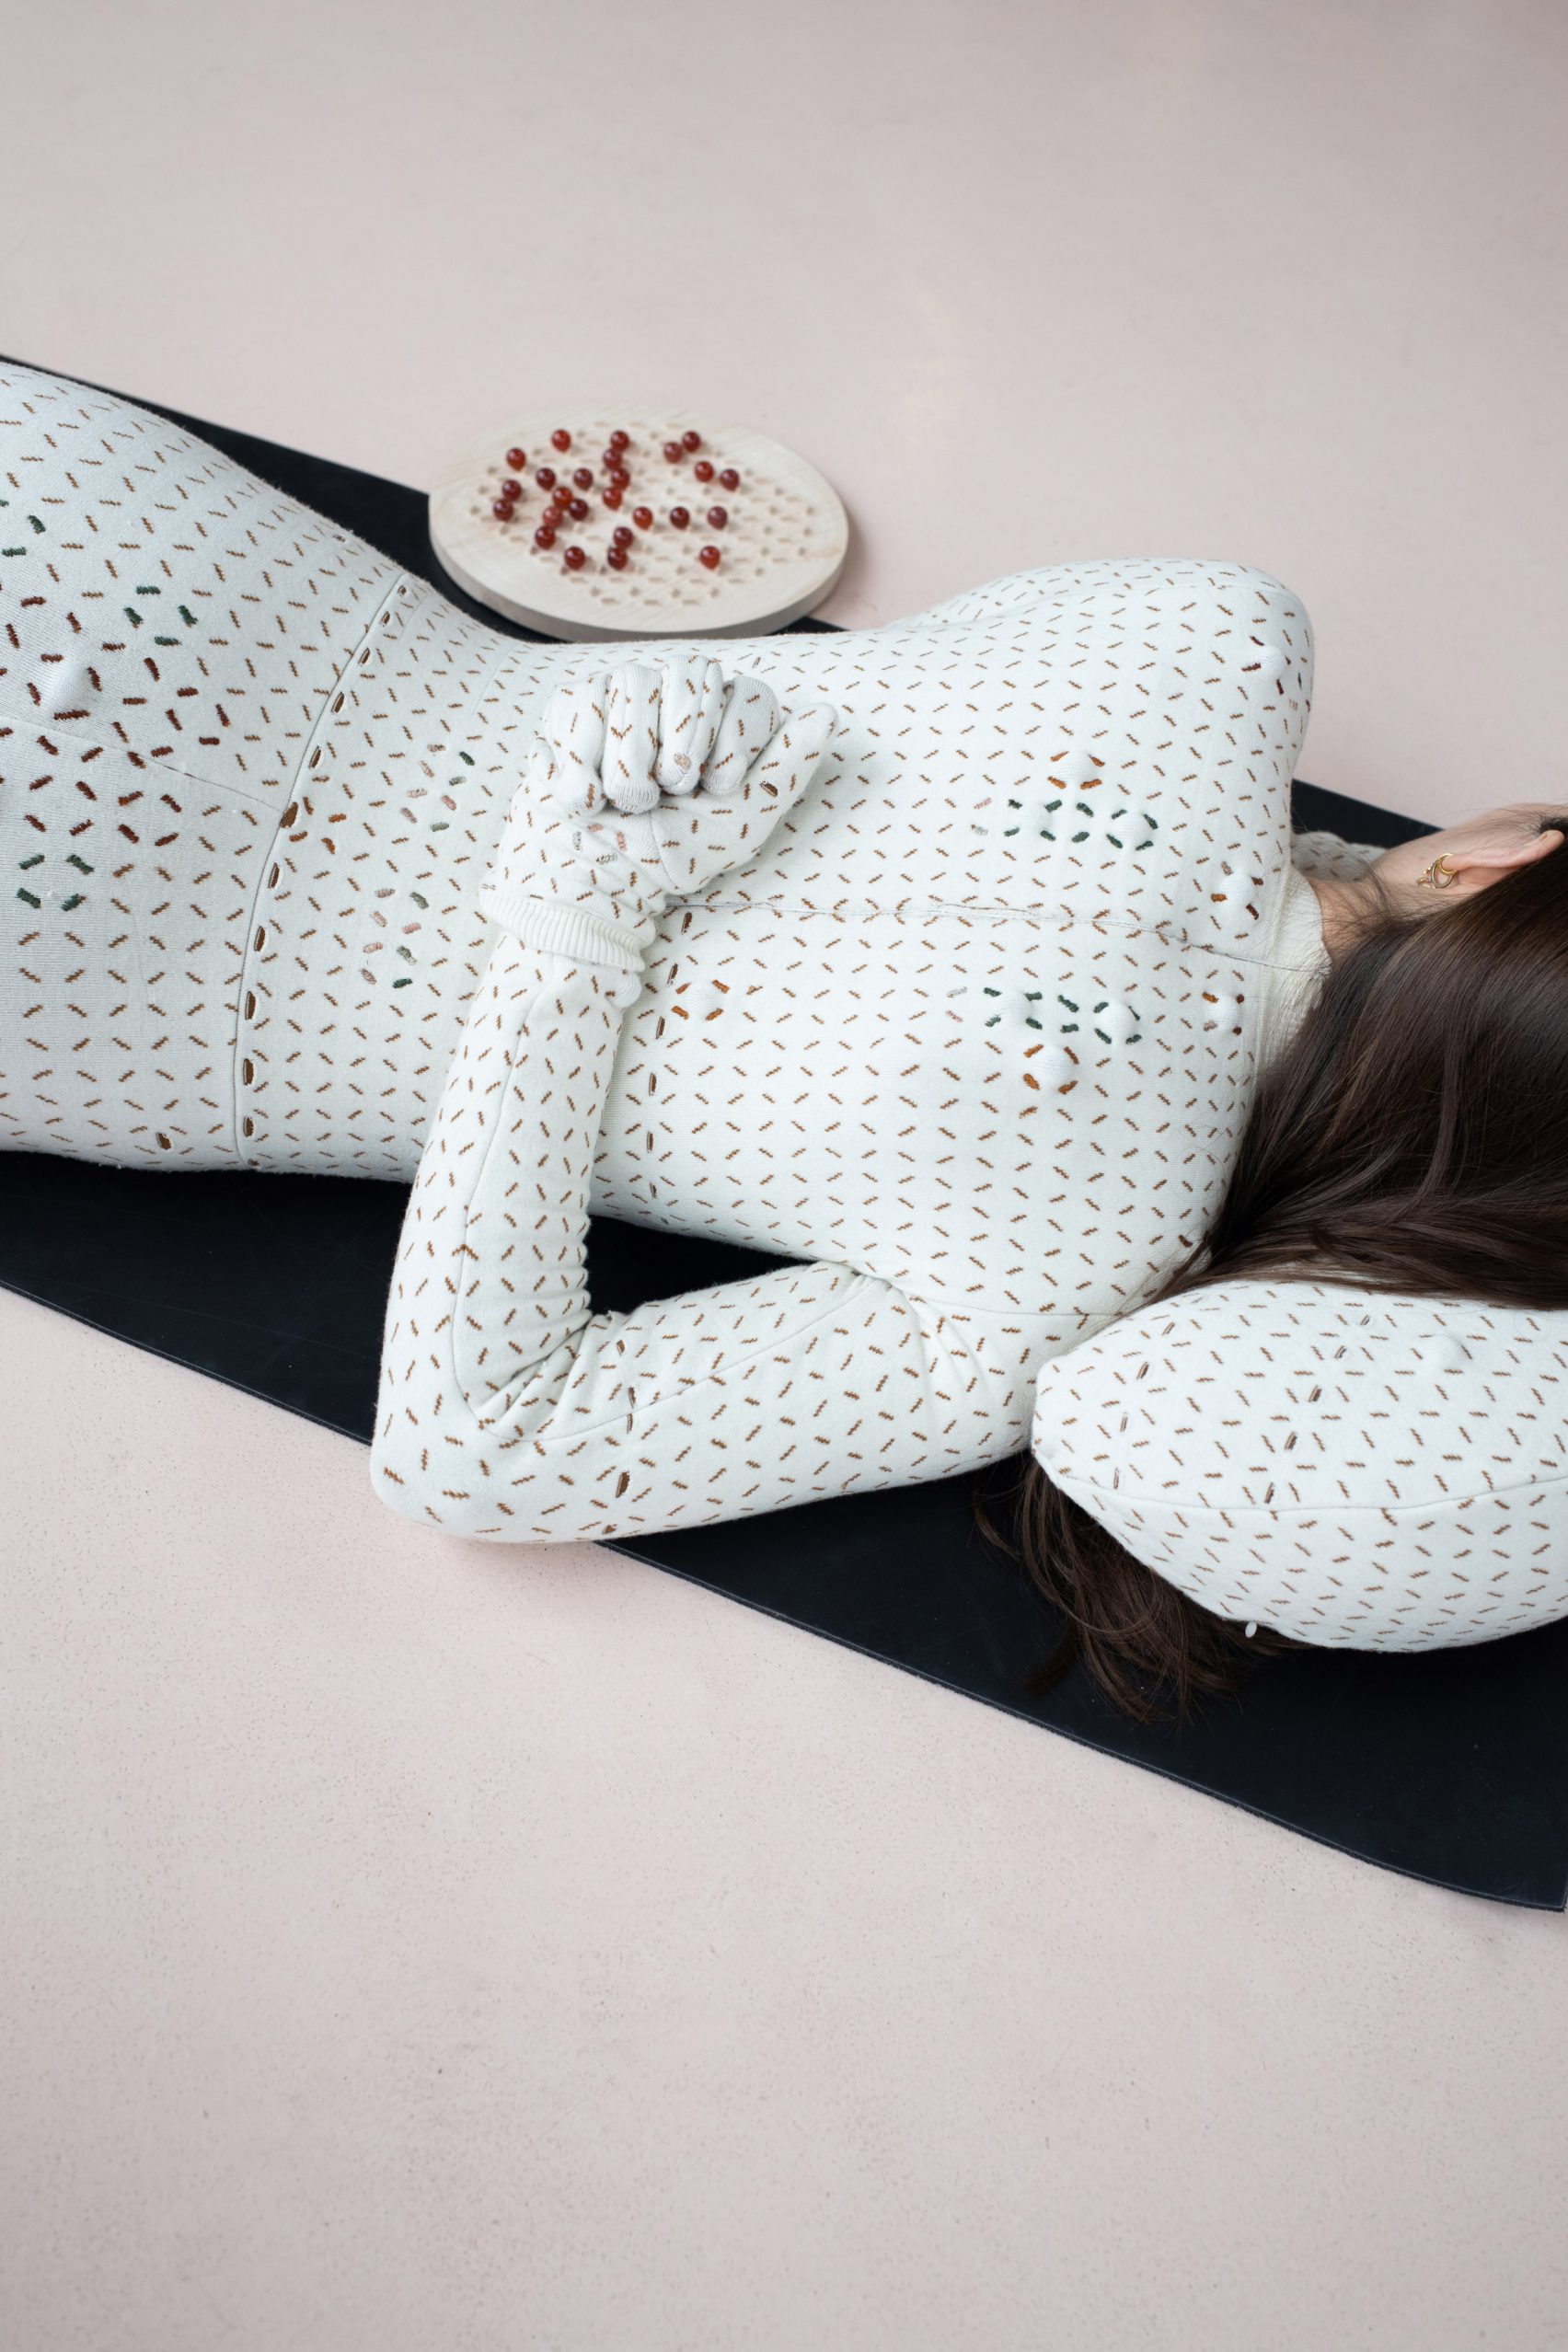 Woman lies on a yoga mat on her stomach with her head resting on a therapeutic pillow